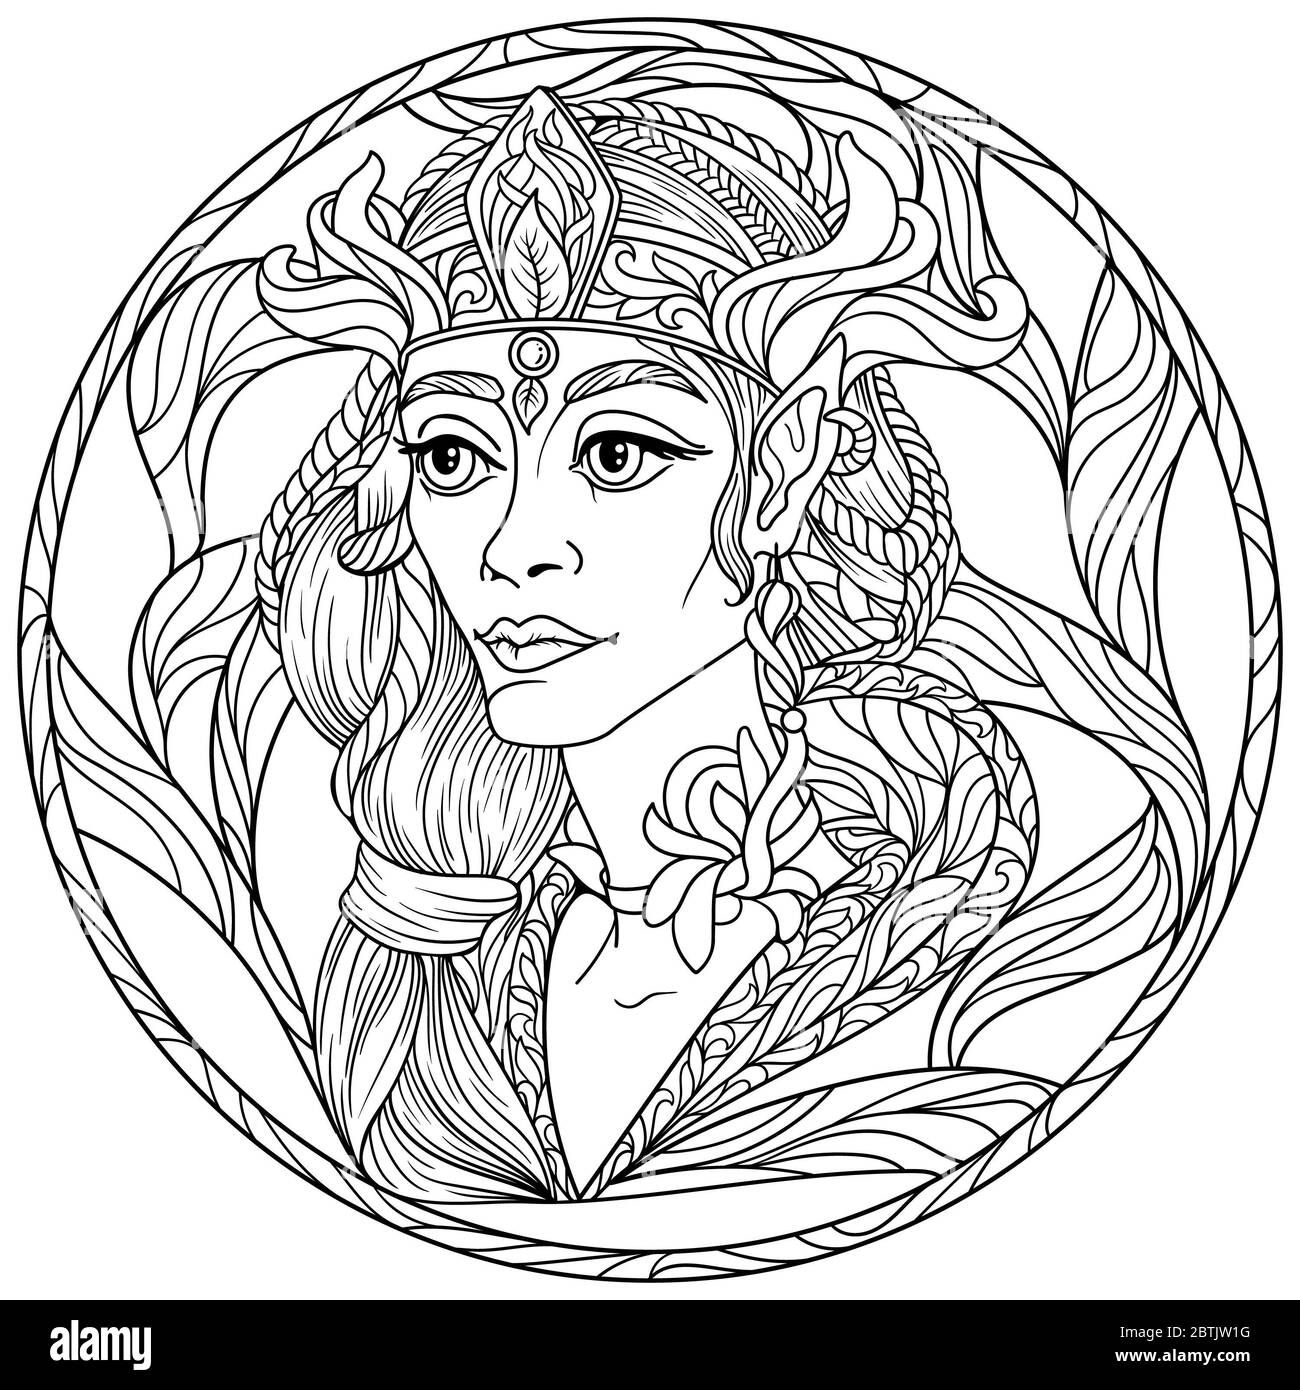 Zentangle Fantasy Coloring Page For Adults Anti Stress With Beautiful Girl Elf Face With Black And White Background Stock Photo Alamy